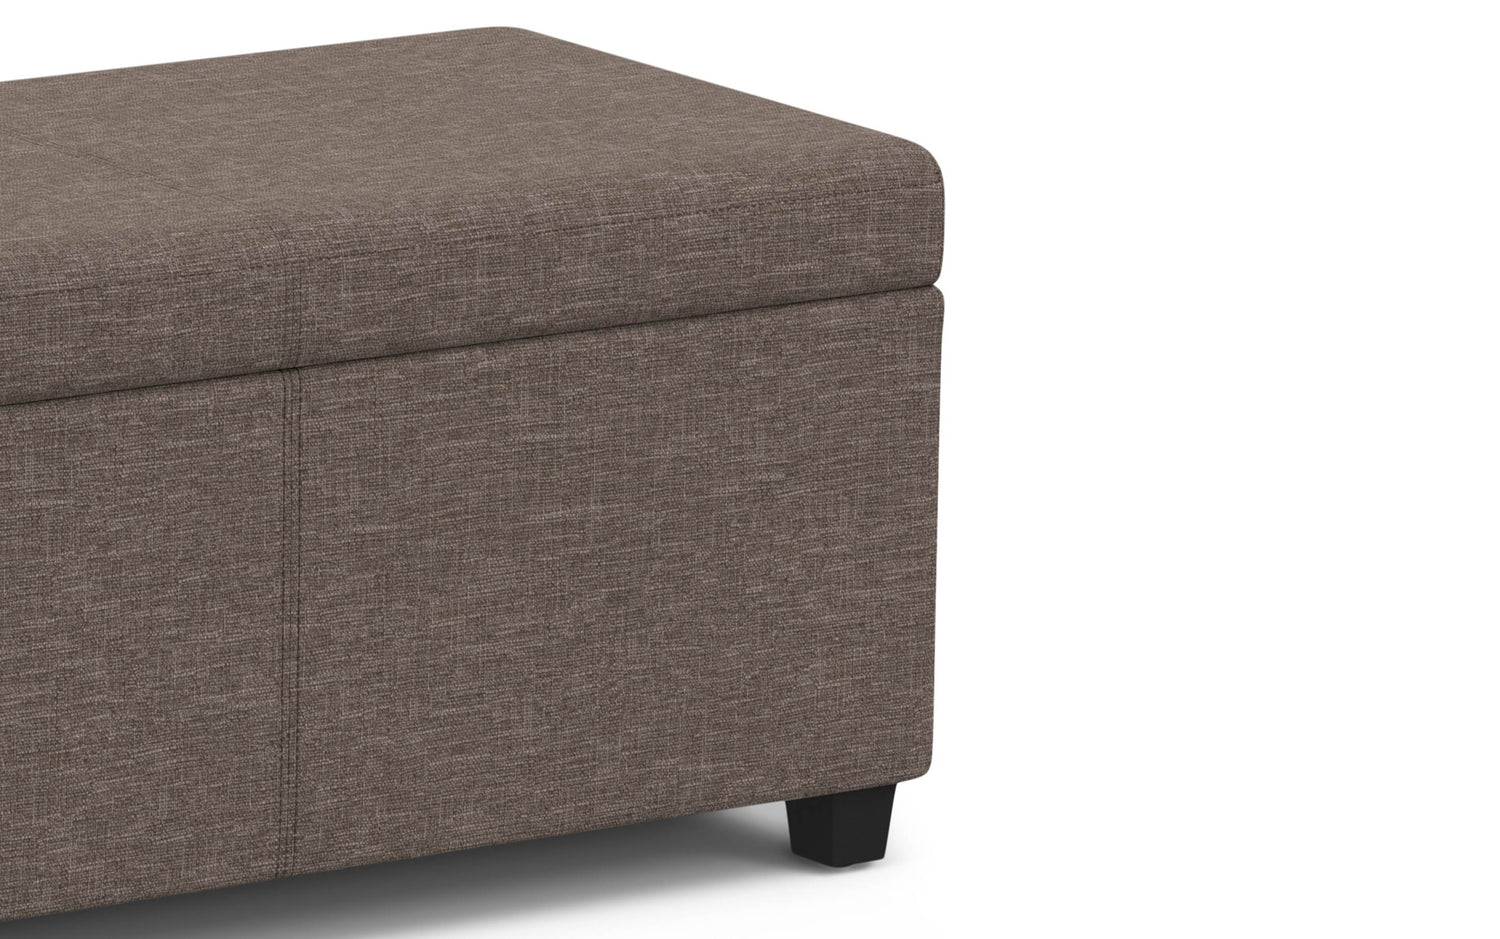 Fawn Brown Linen Style Fabric | Avalon Extra Large Storage Ottoman Bench